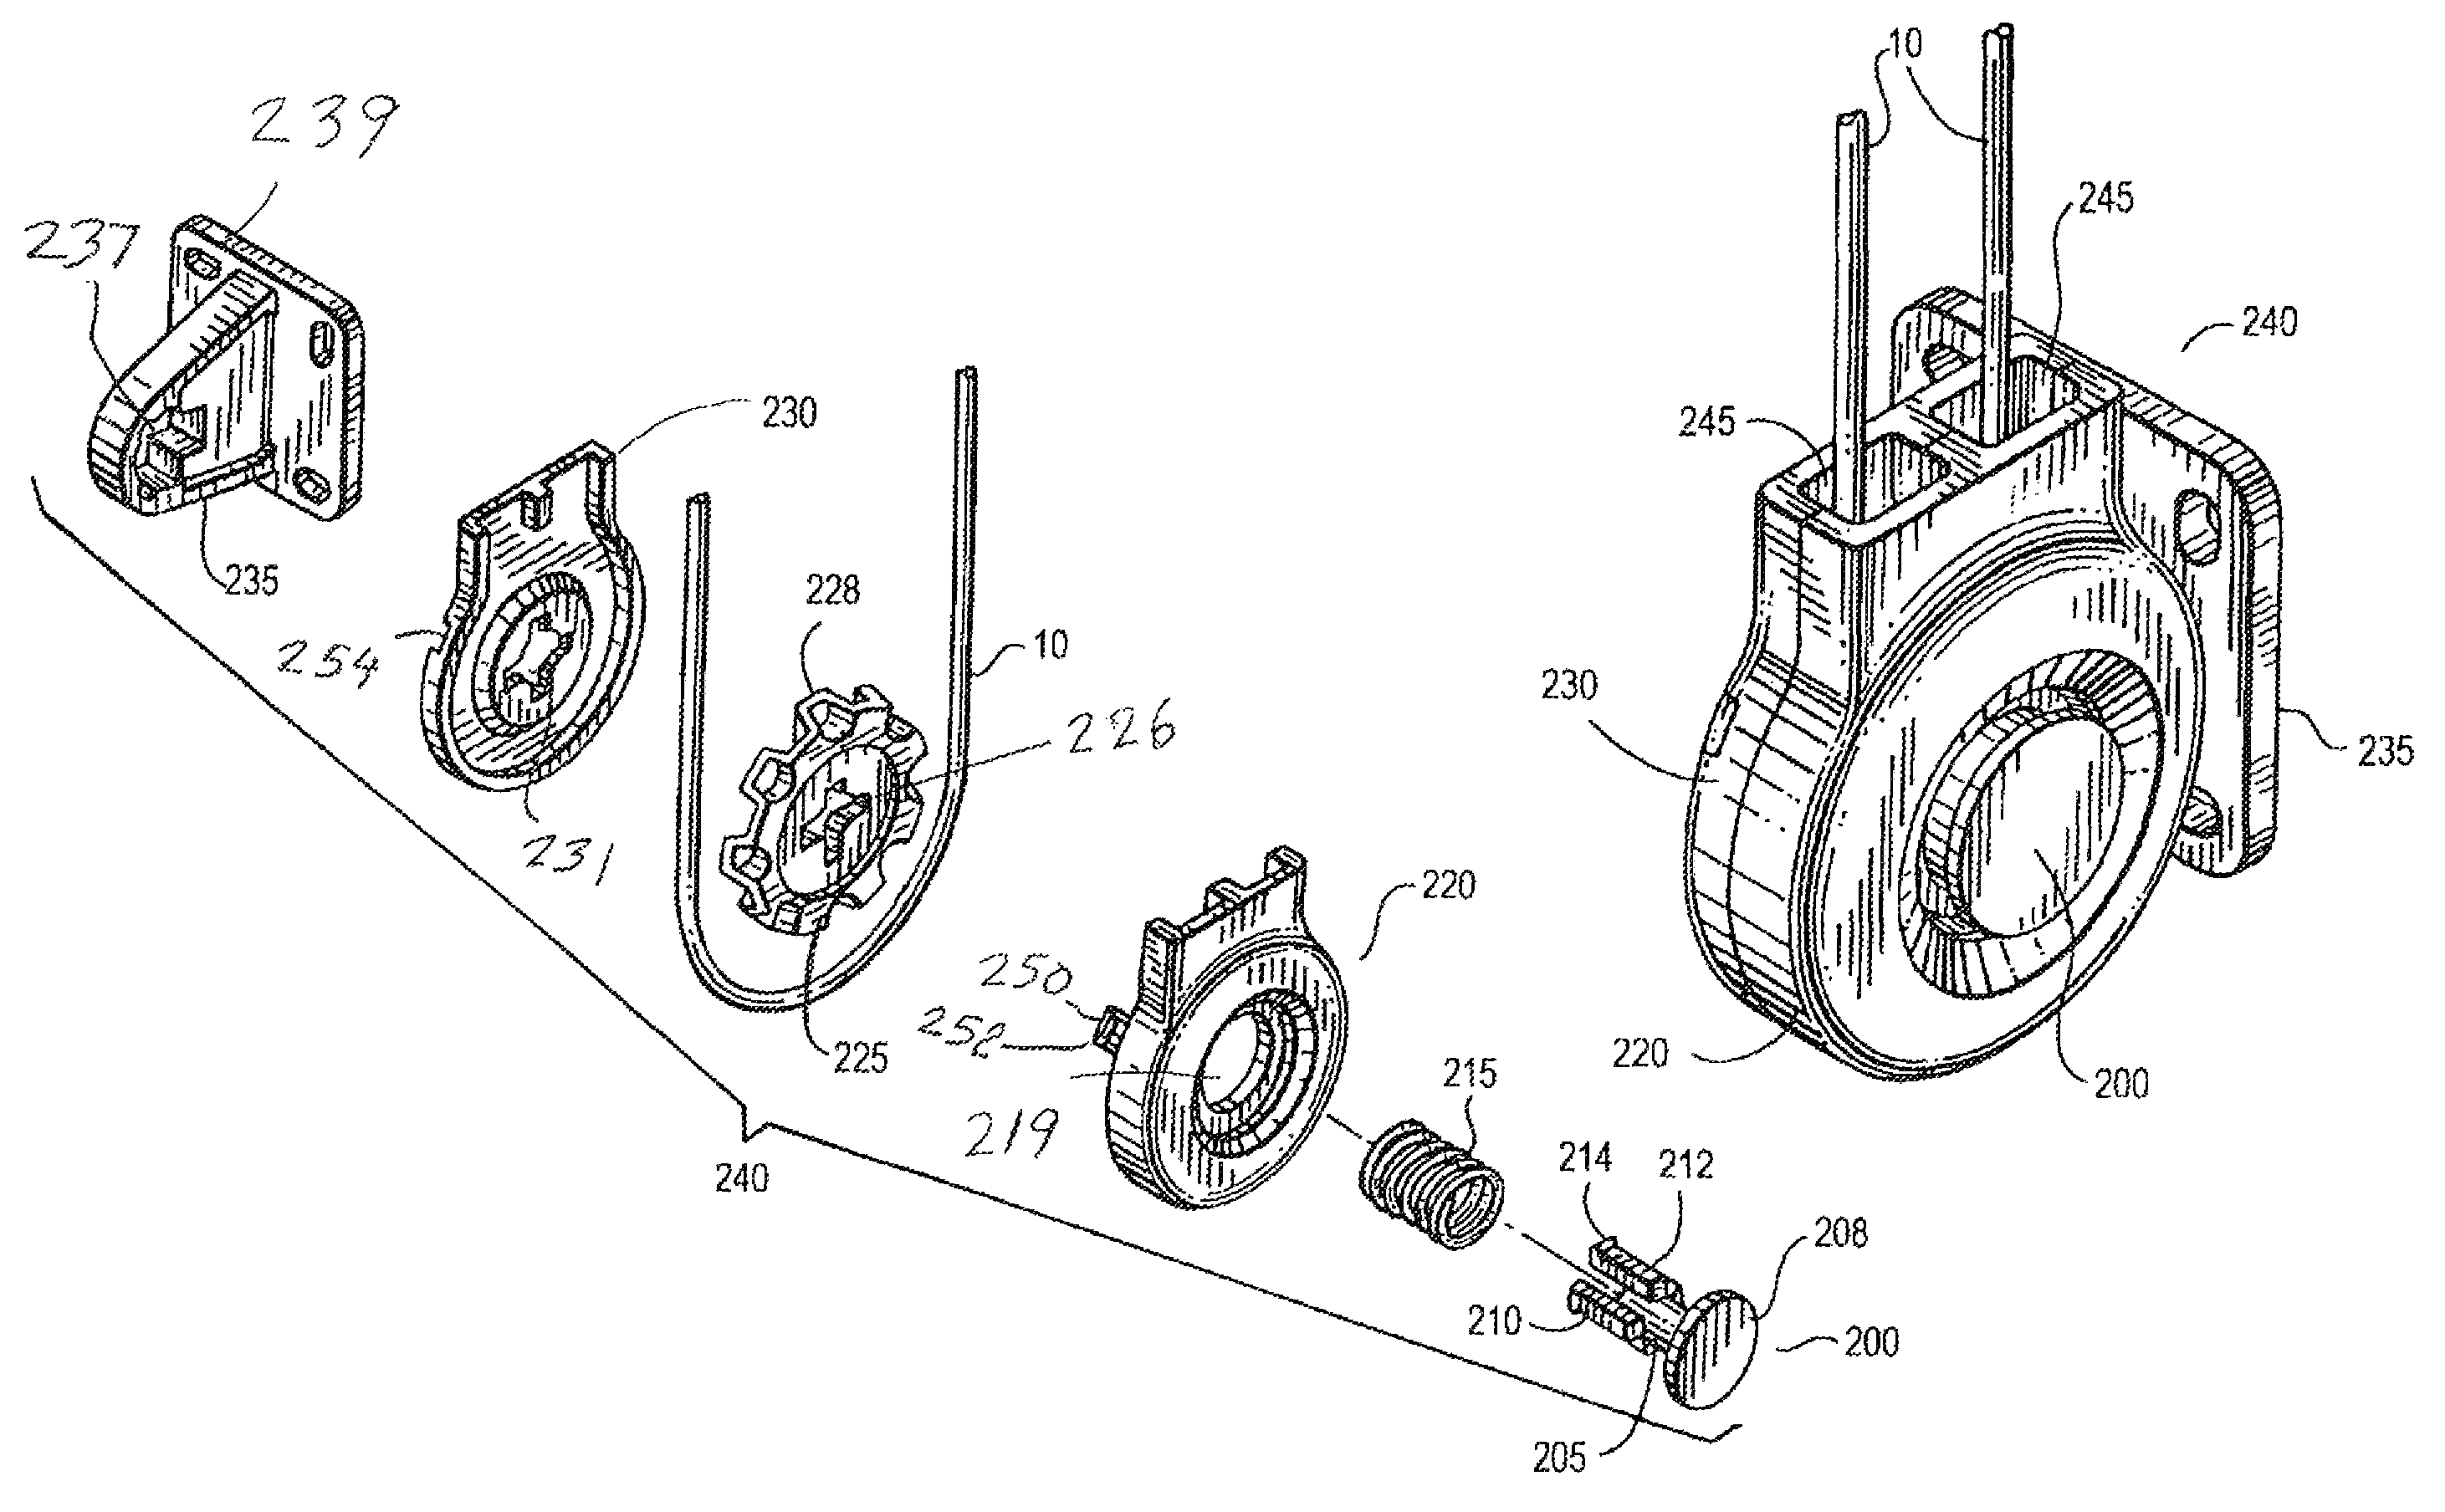 Active tension device for a window covering